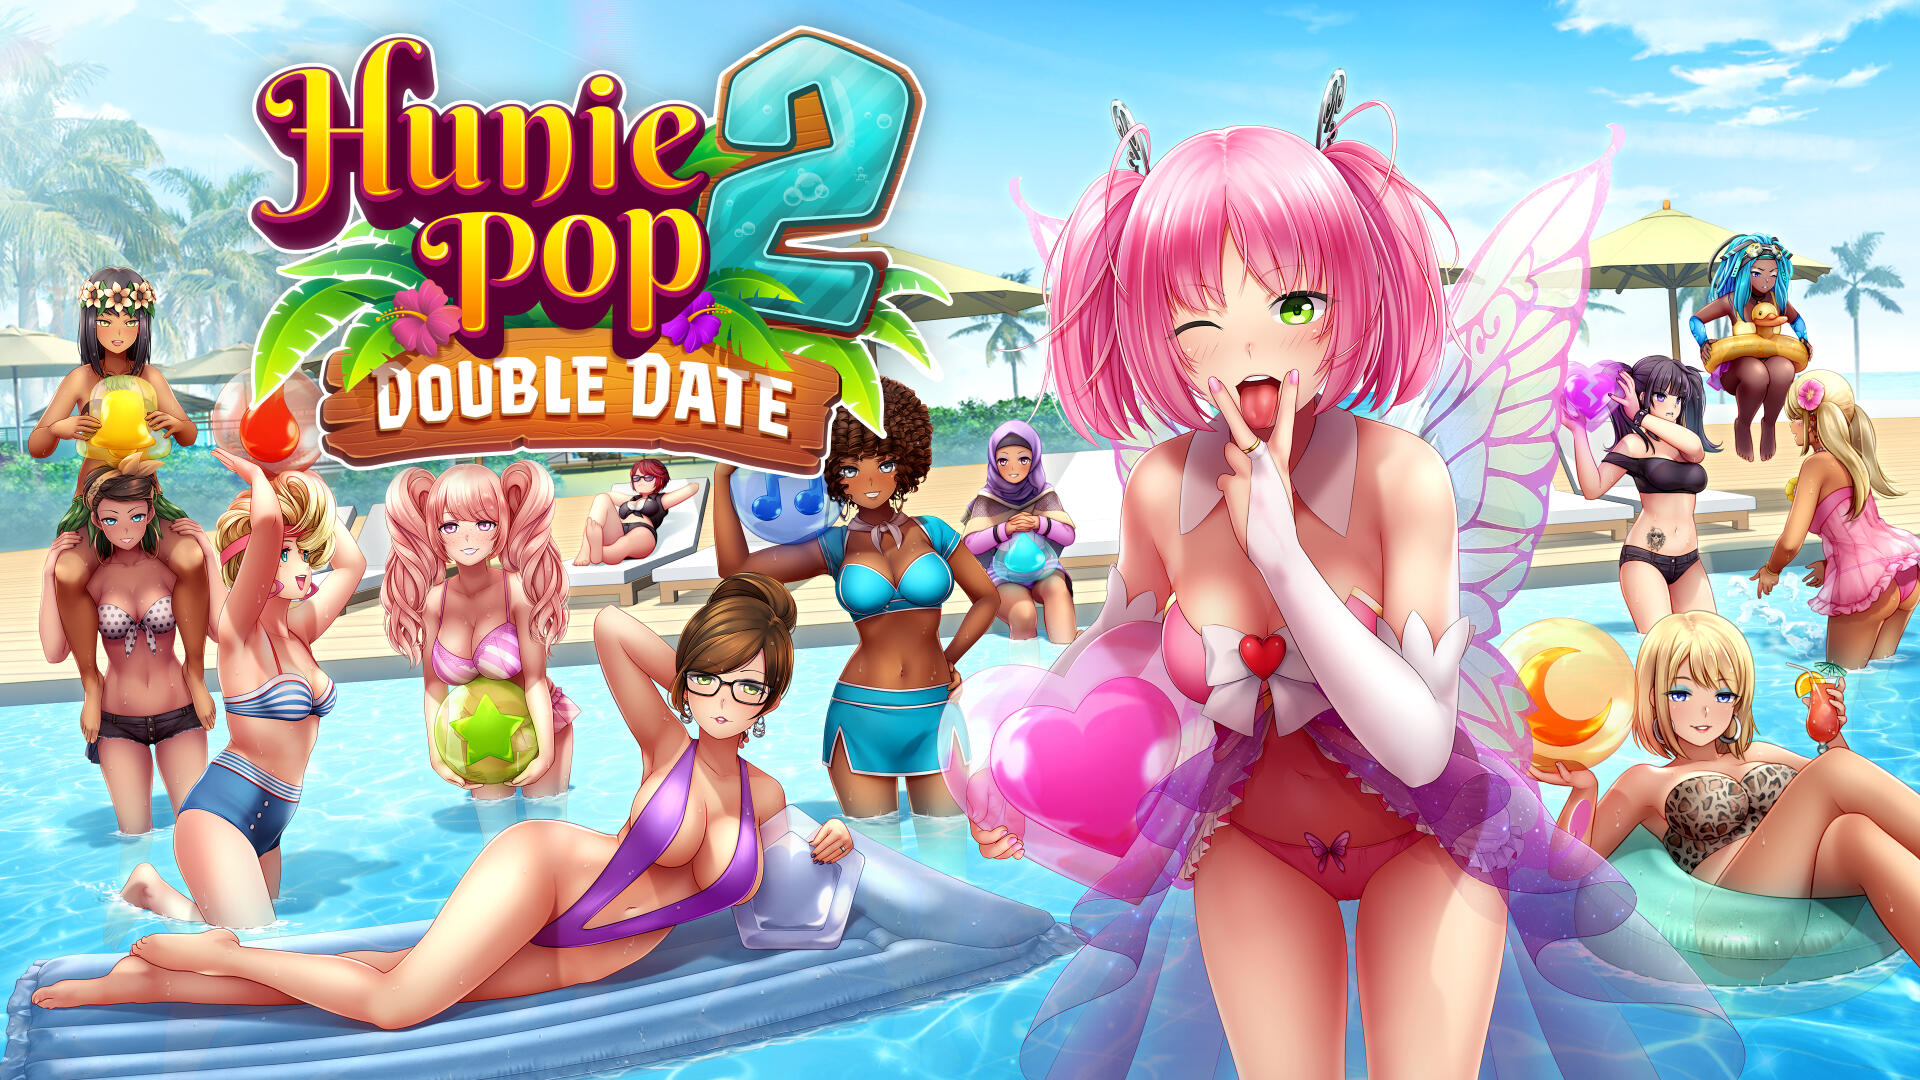 darren simmons recommends all pictures from huniepop pic